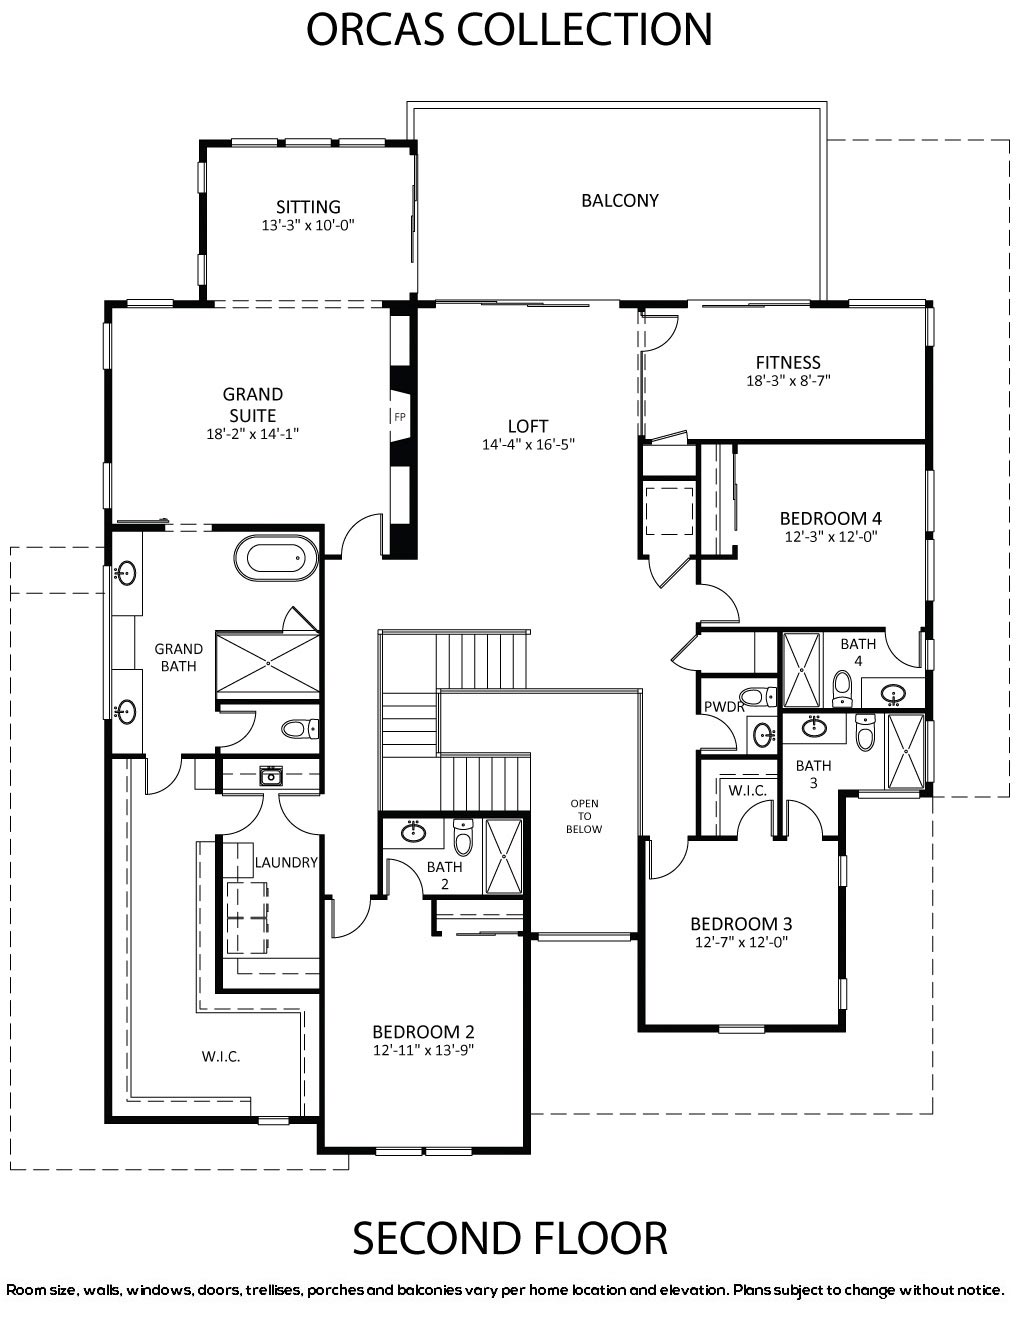 Homesite 7 Orcas Collection Second Floor